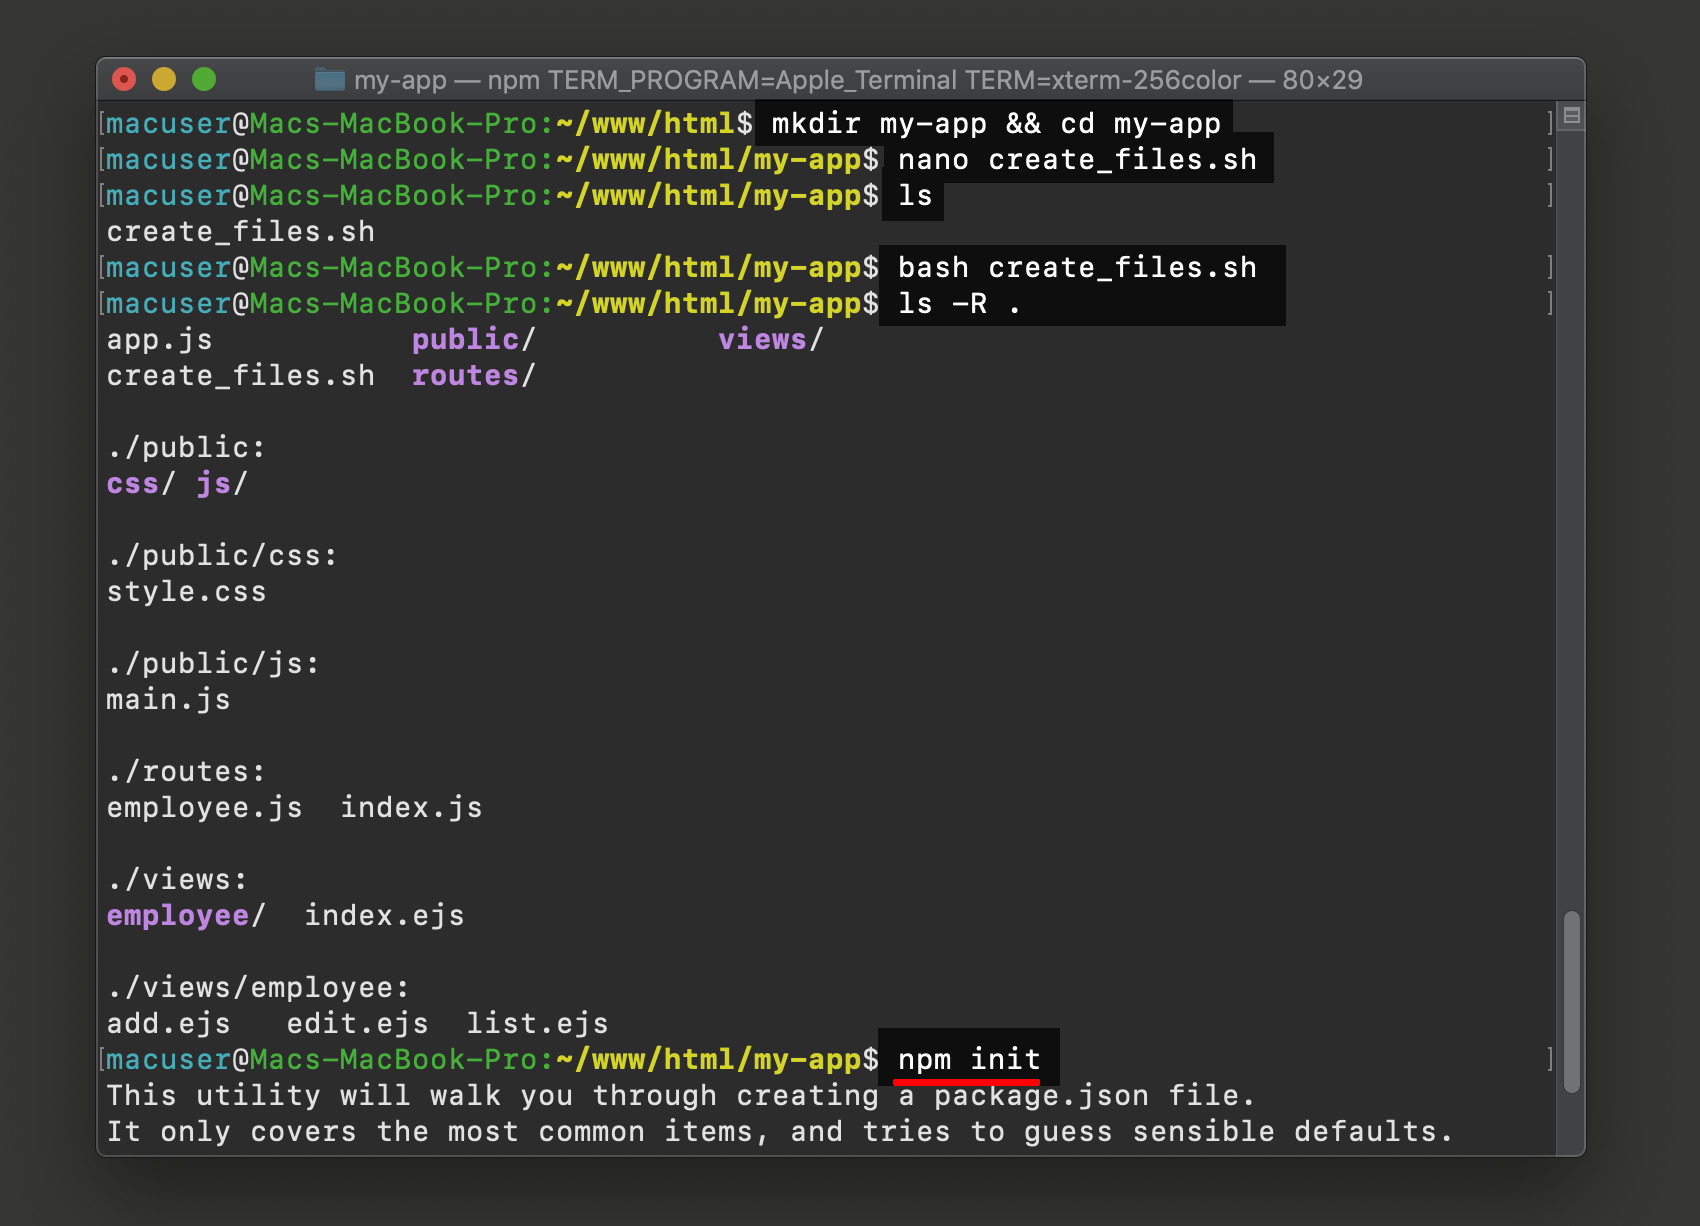 Screenshot of a UNIX terminal listing ls du all of the Postgres Node app's files and subdirectories